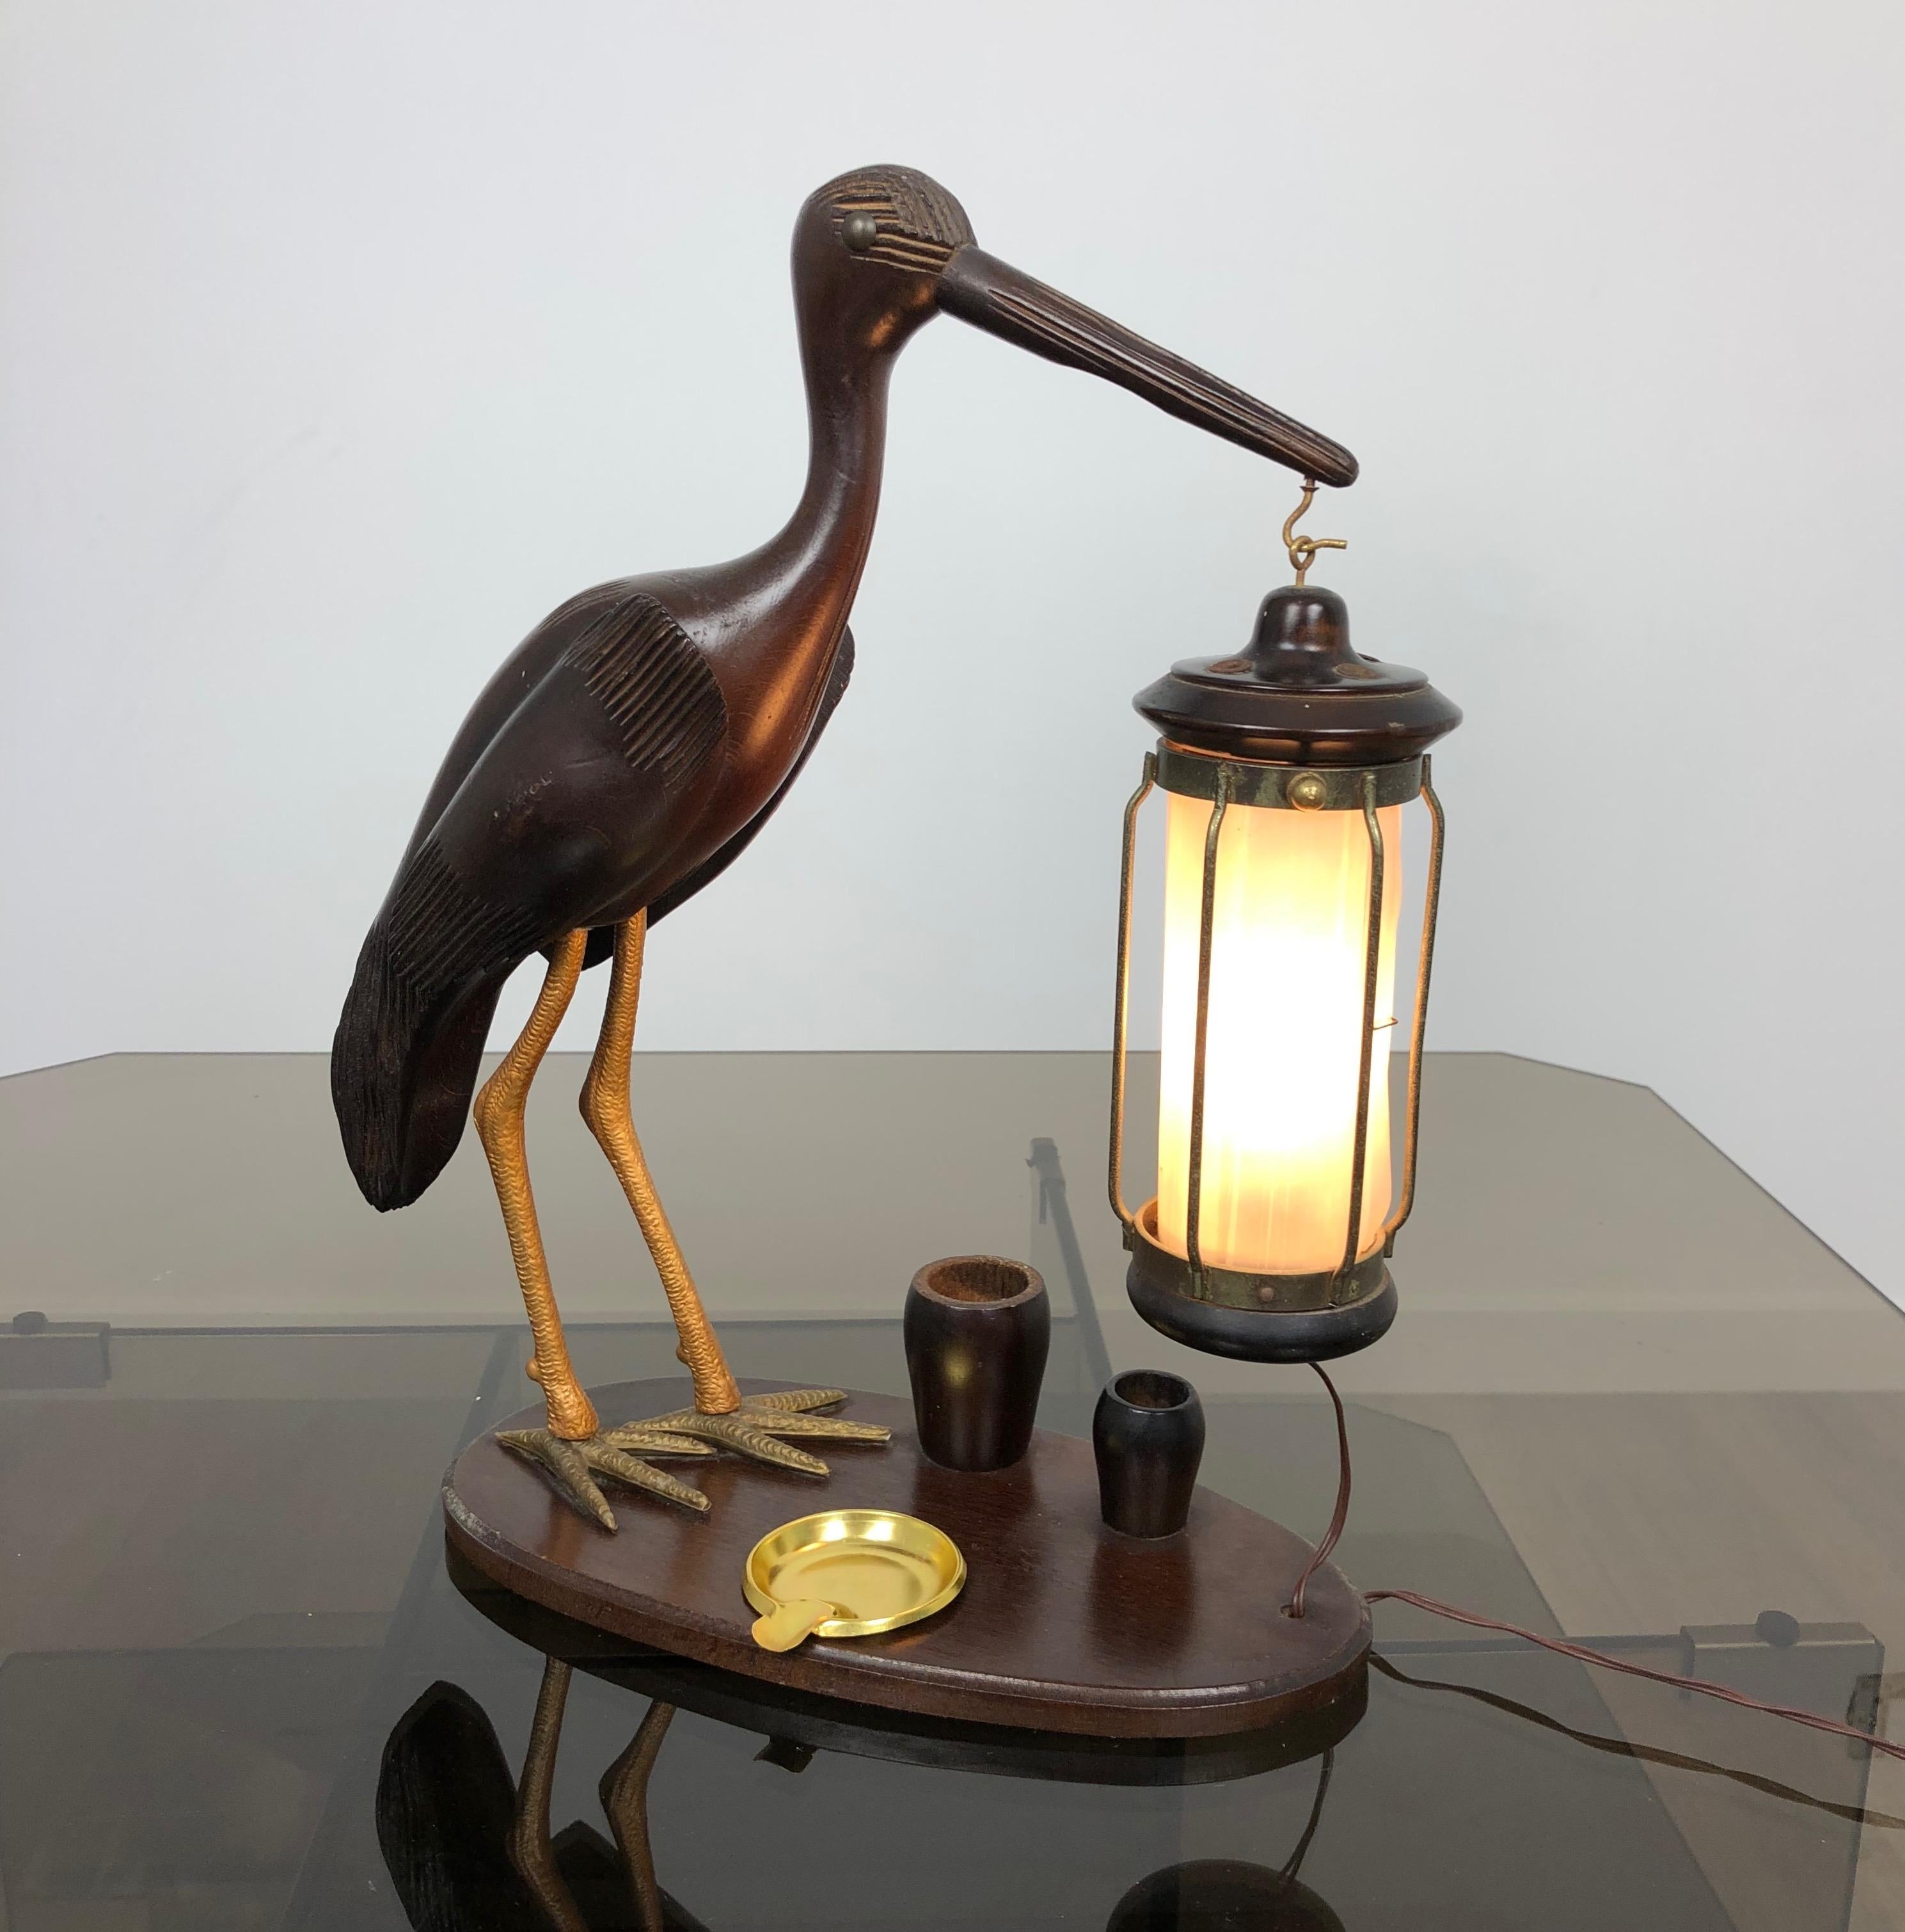 1940s Art Deco Heron Table Lamp Ashtray Cigarette Service Italy Hand Carved Wood 4